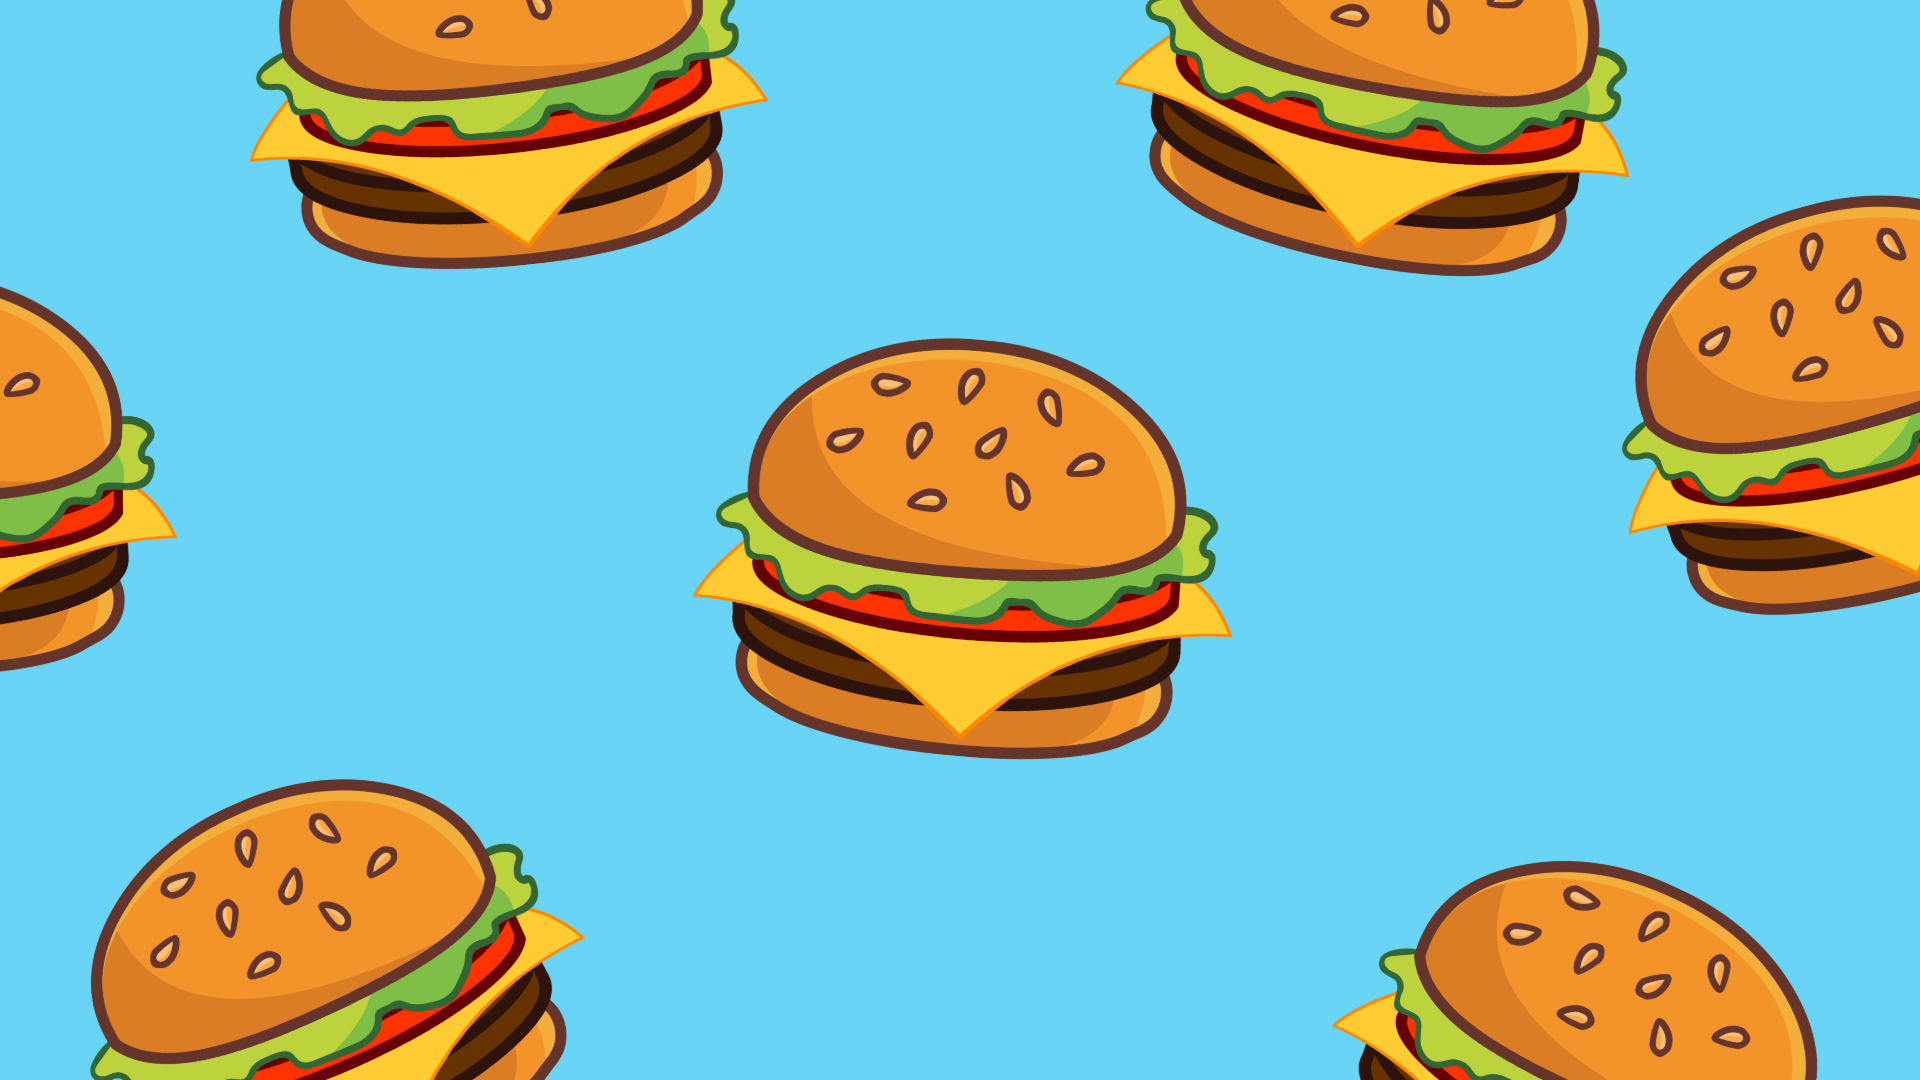 cartoon cheeseburgers float on a bright blue background